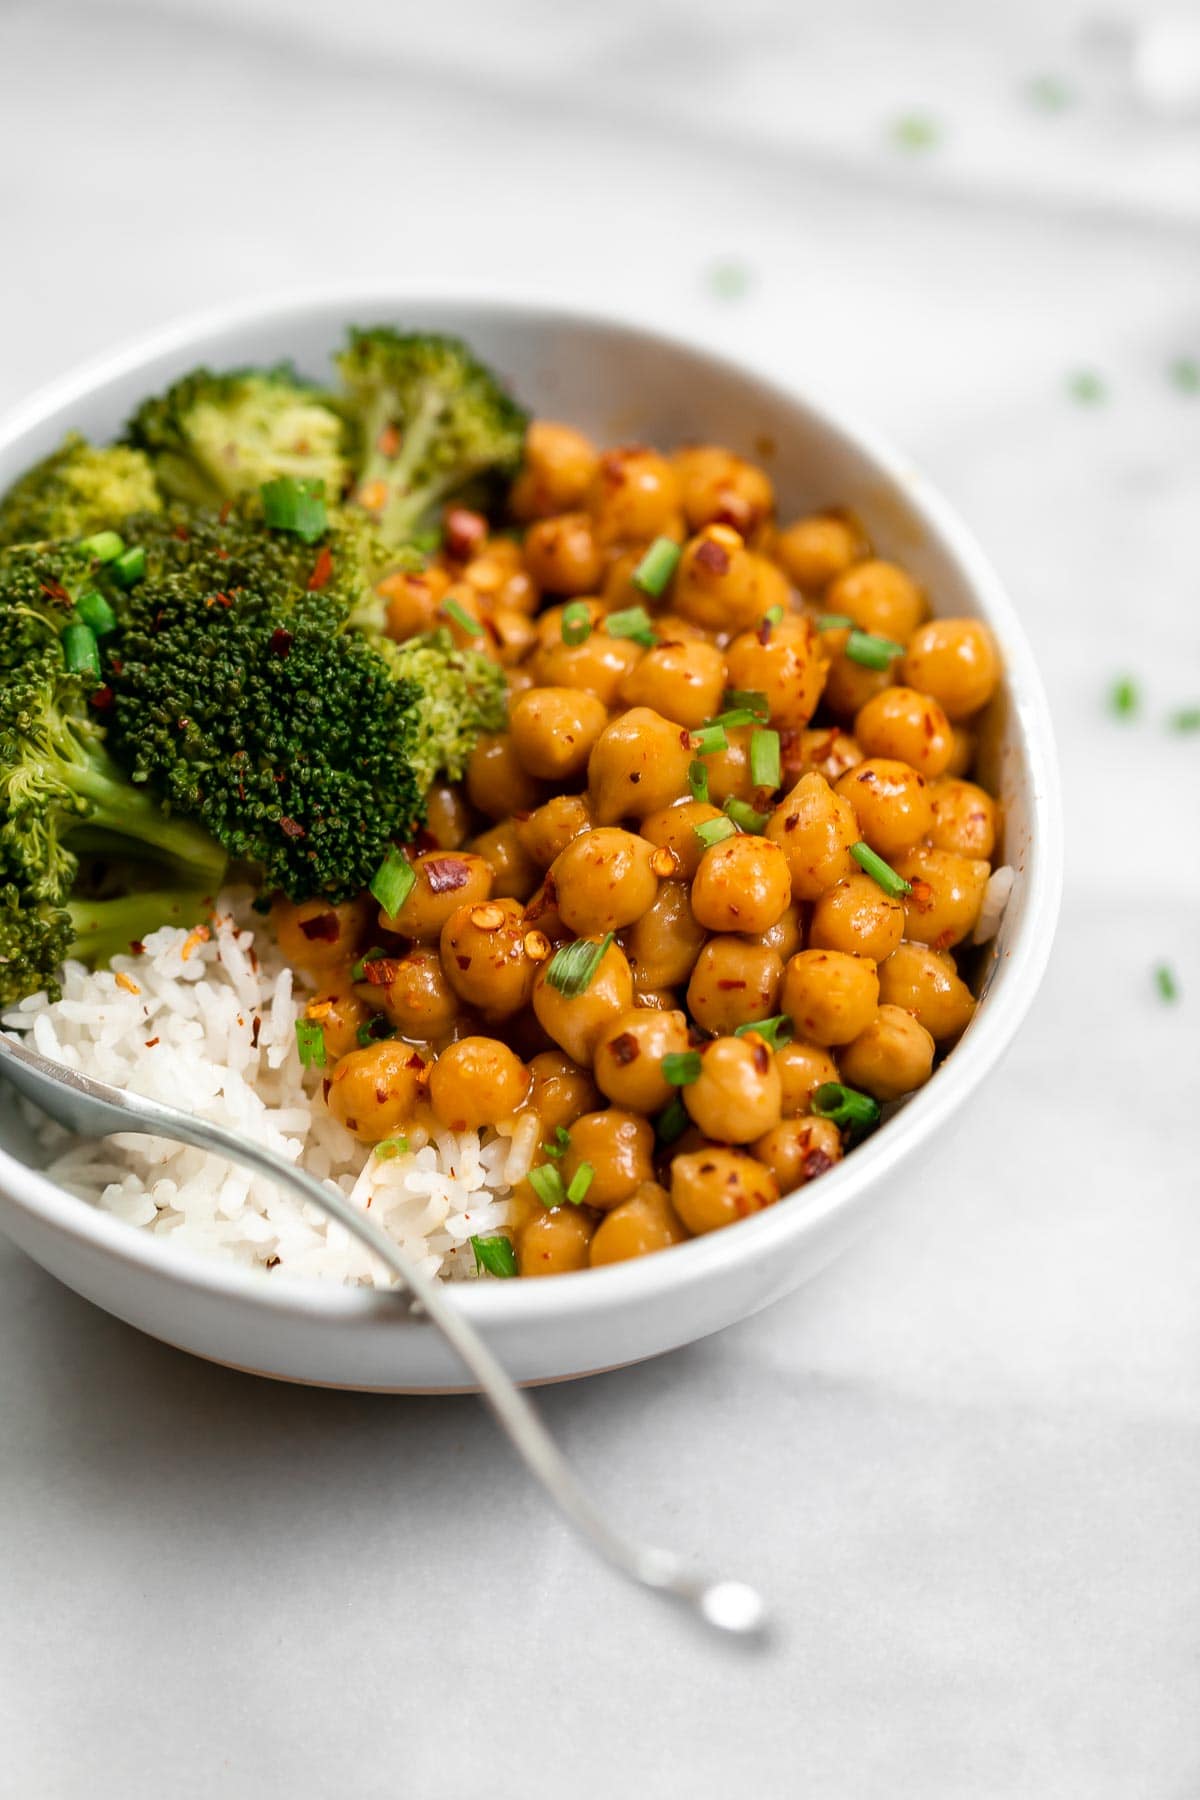 Angled view of the final orange chickpeas with broccoli in a buddha bowl.